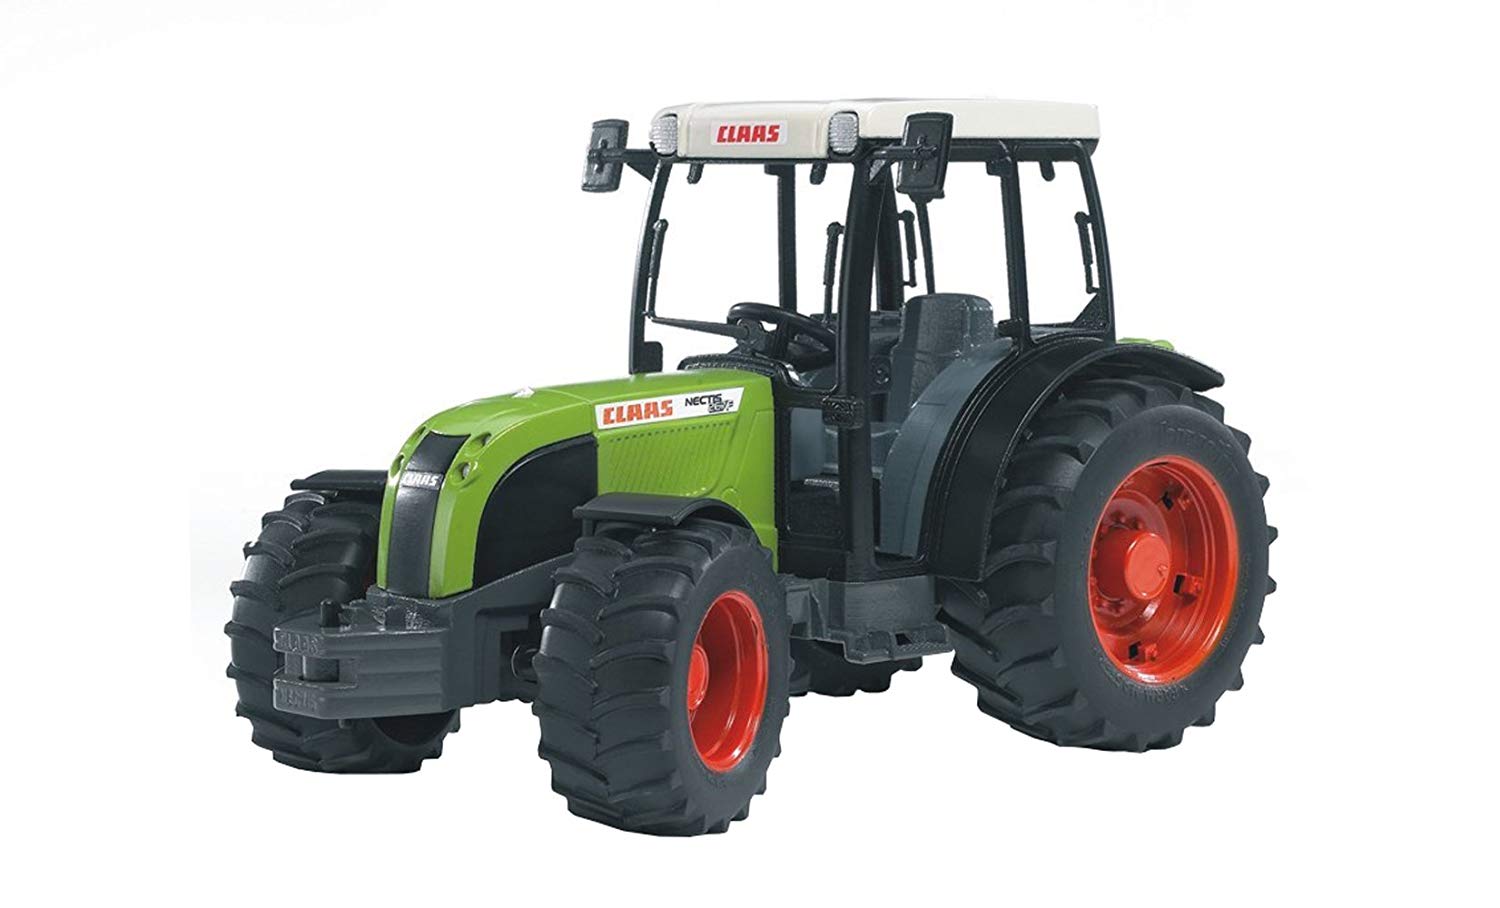 Bruder Claas Nectis F Tractor